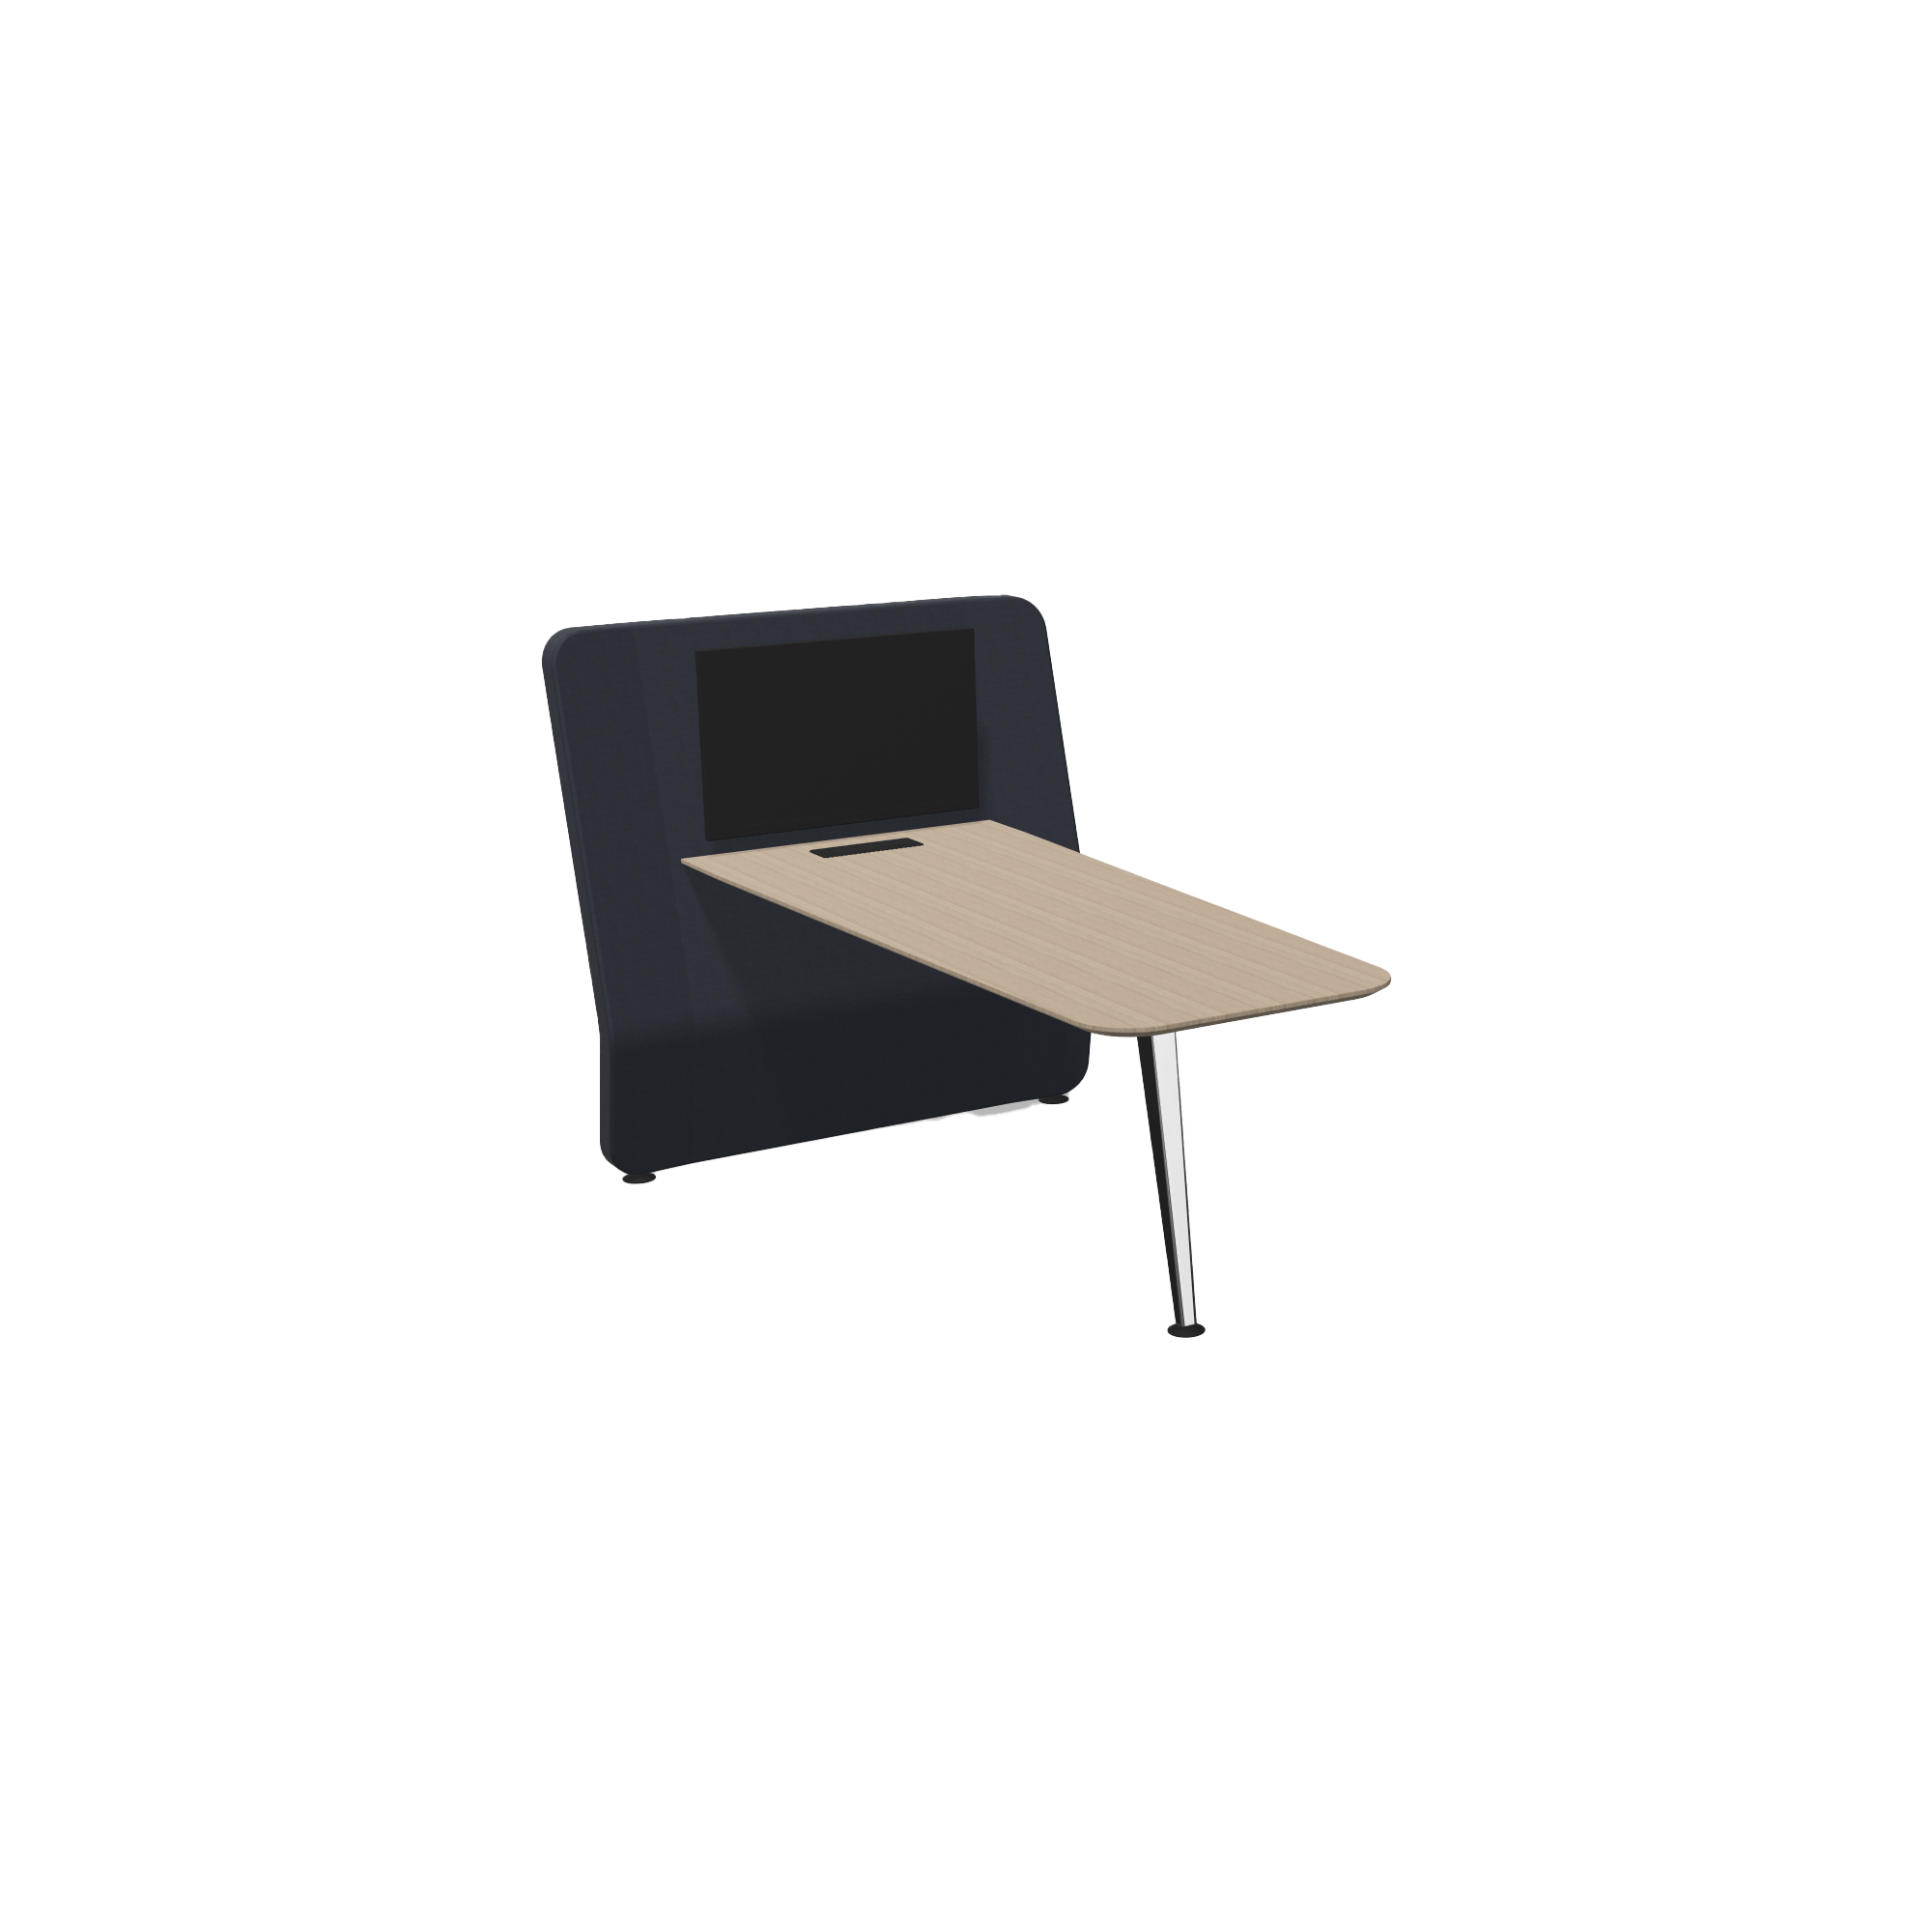 A desk with a laptop on top of it.